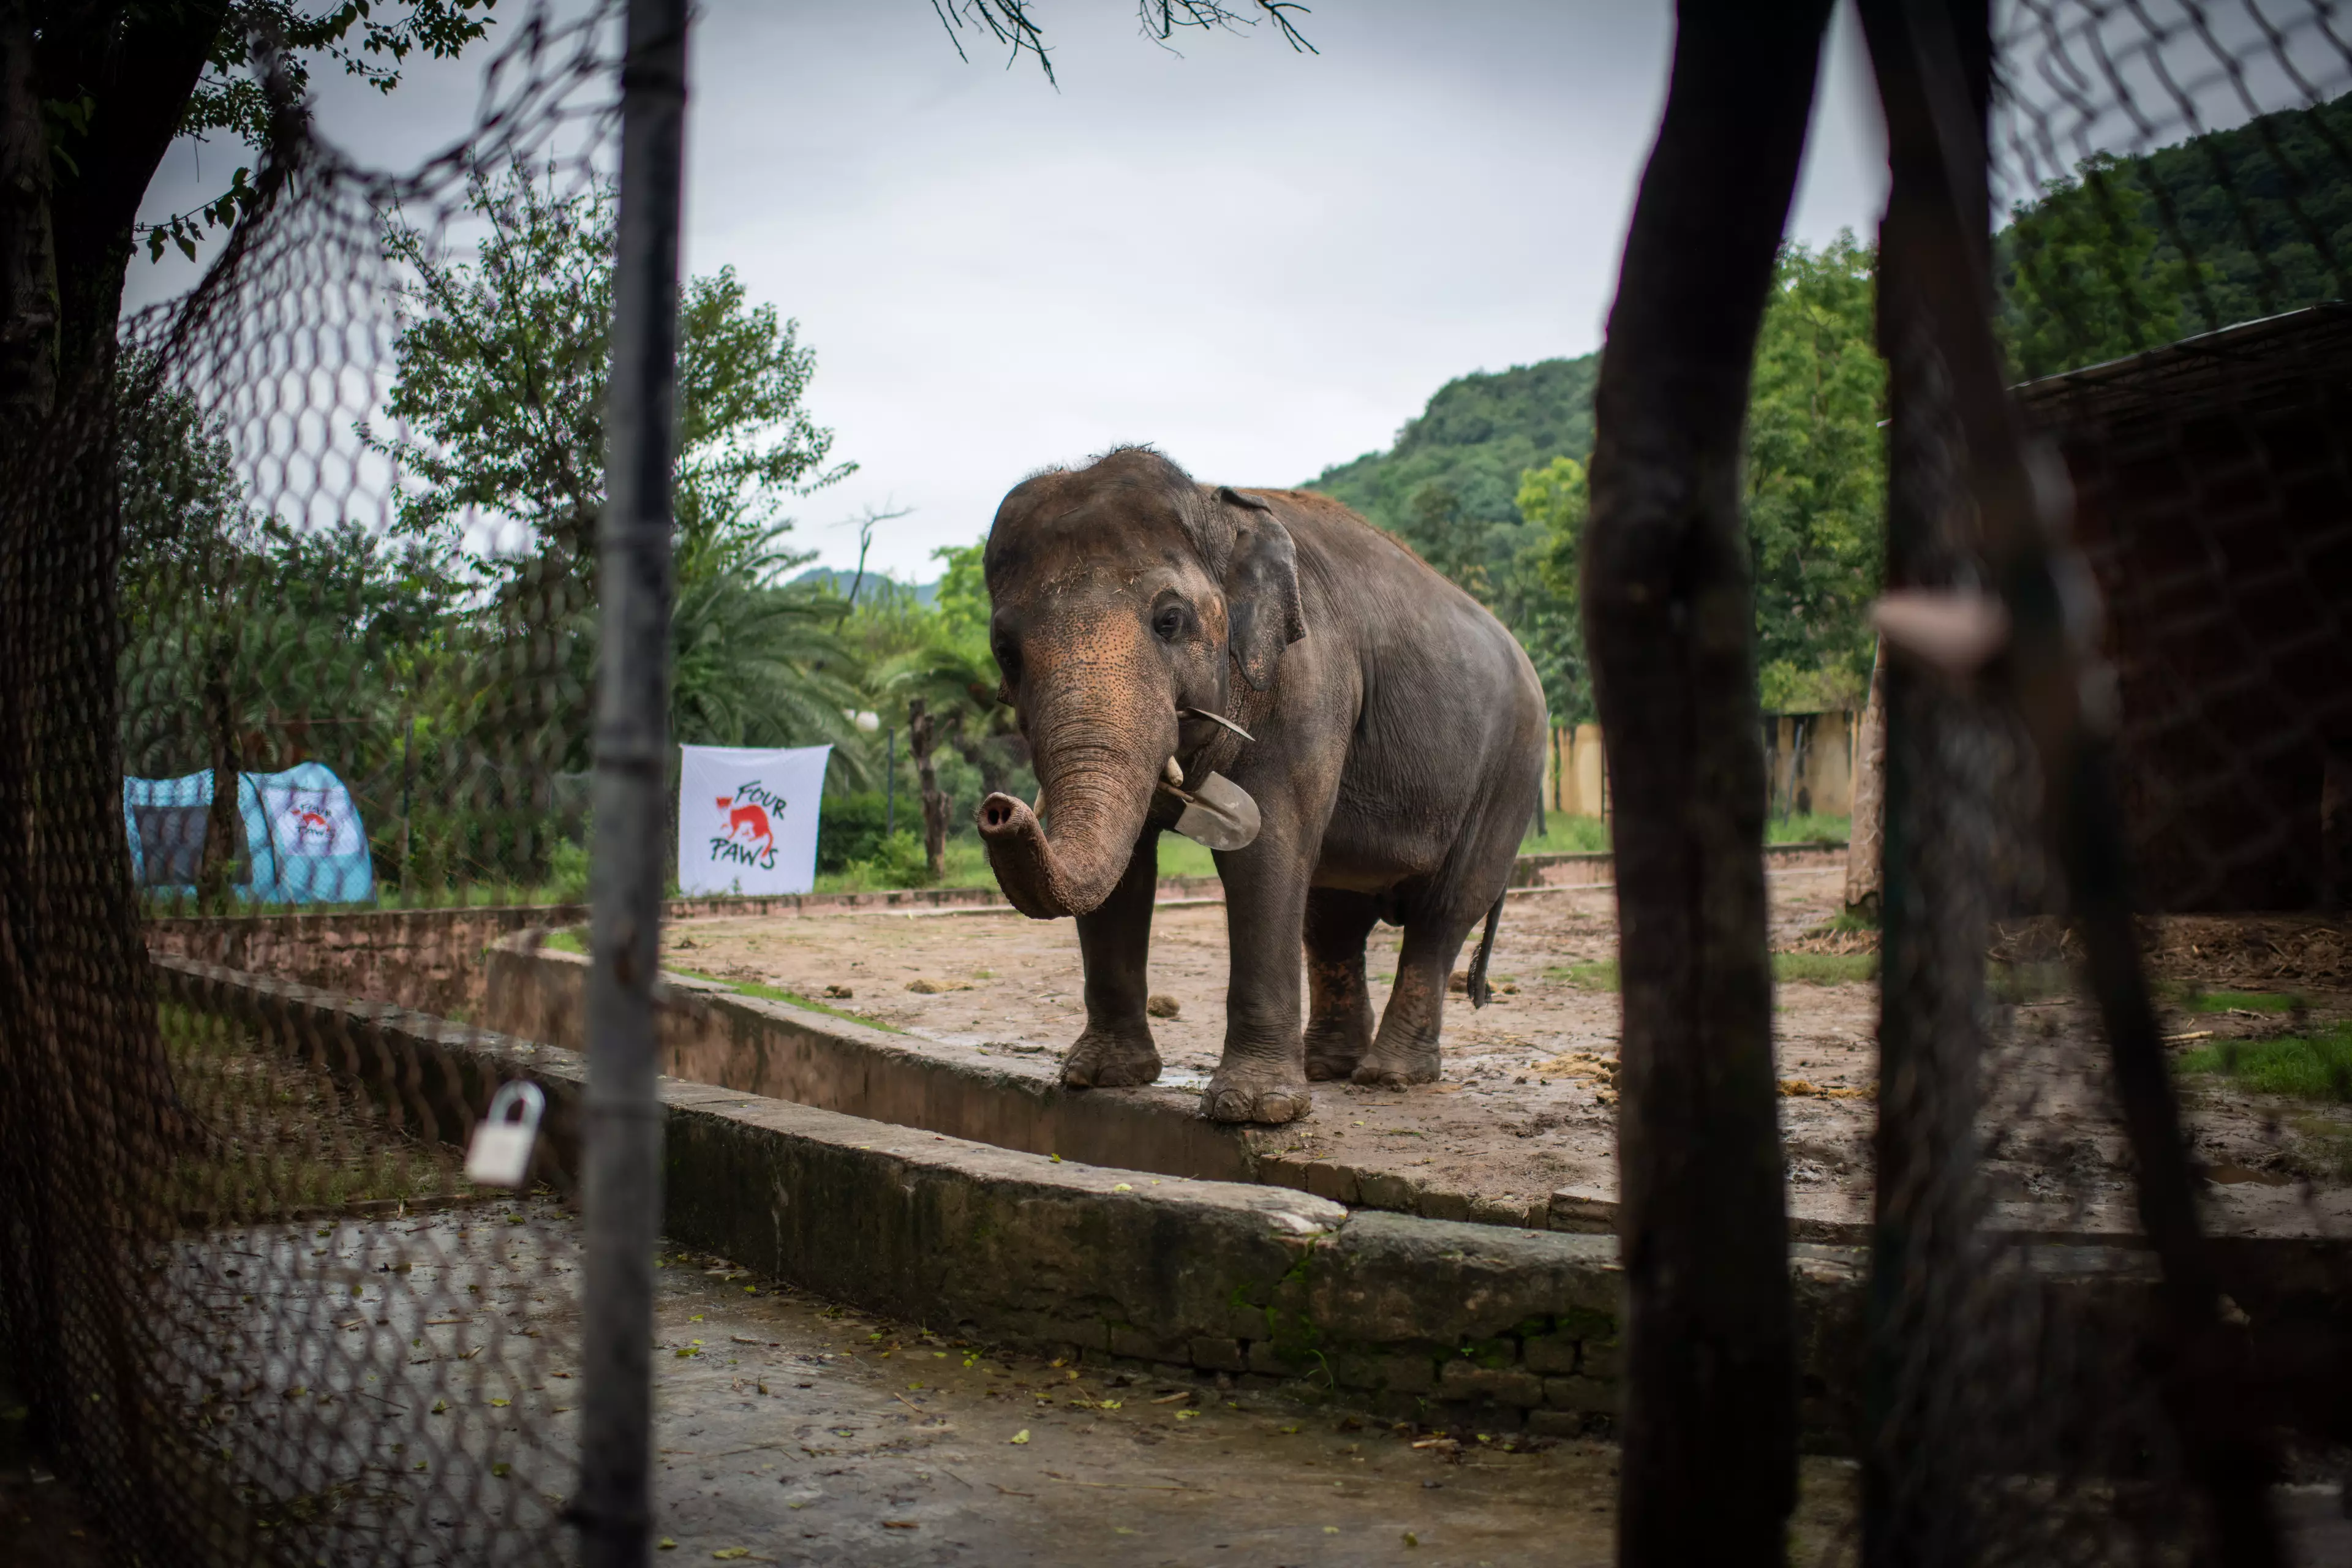 Kaavan had been in the zoo for 35 years (